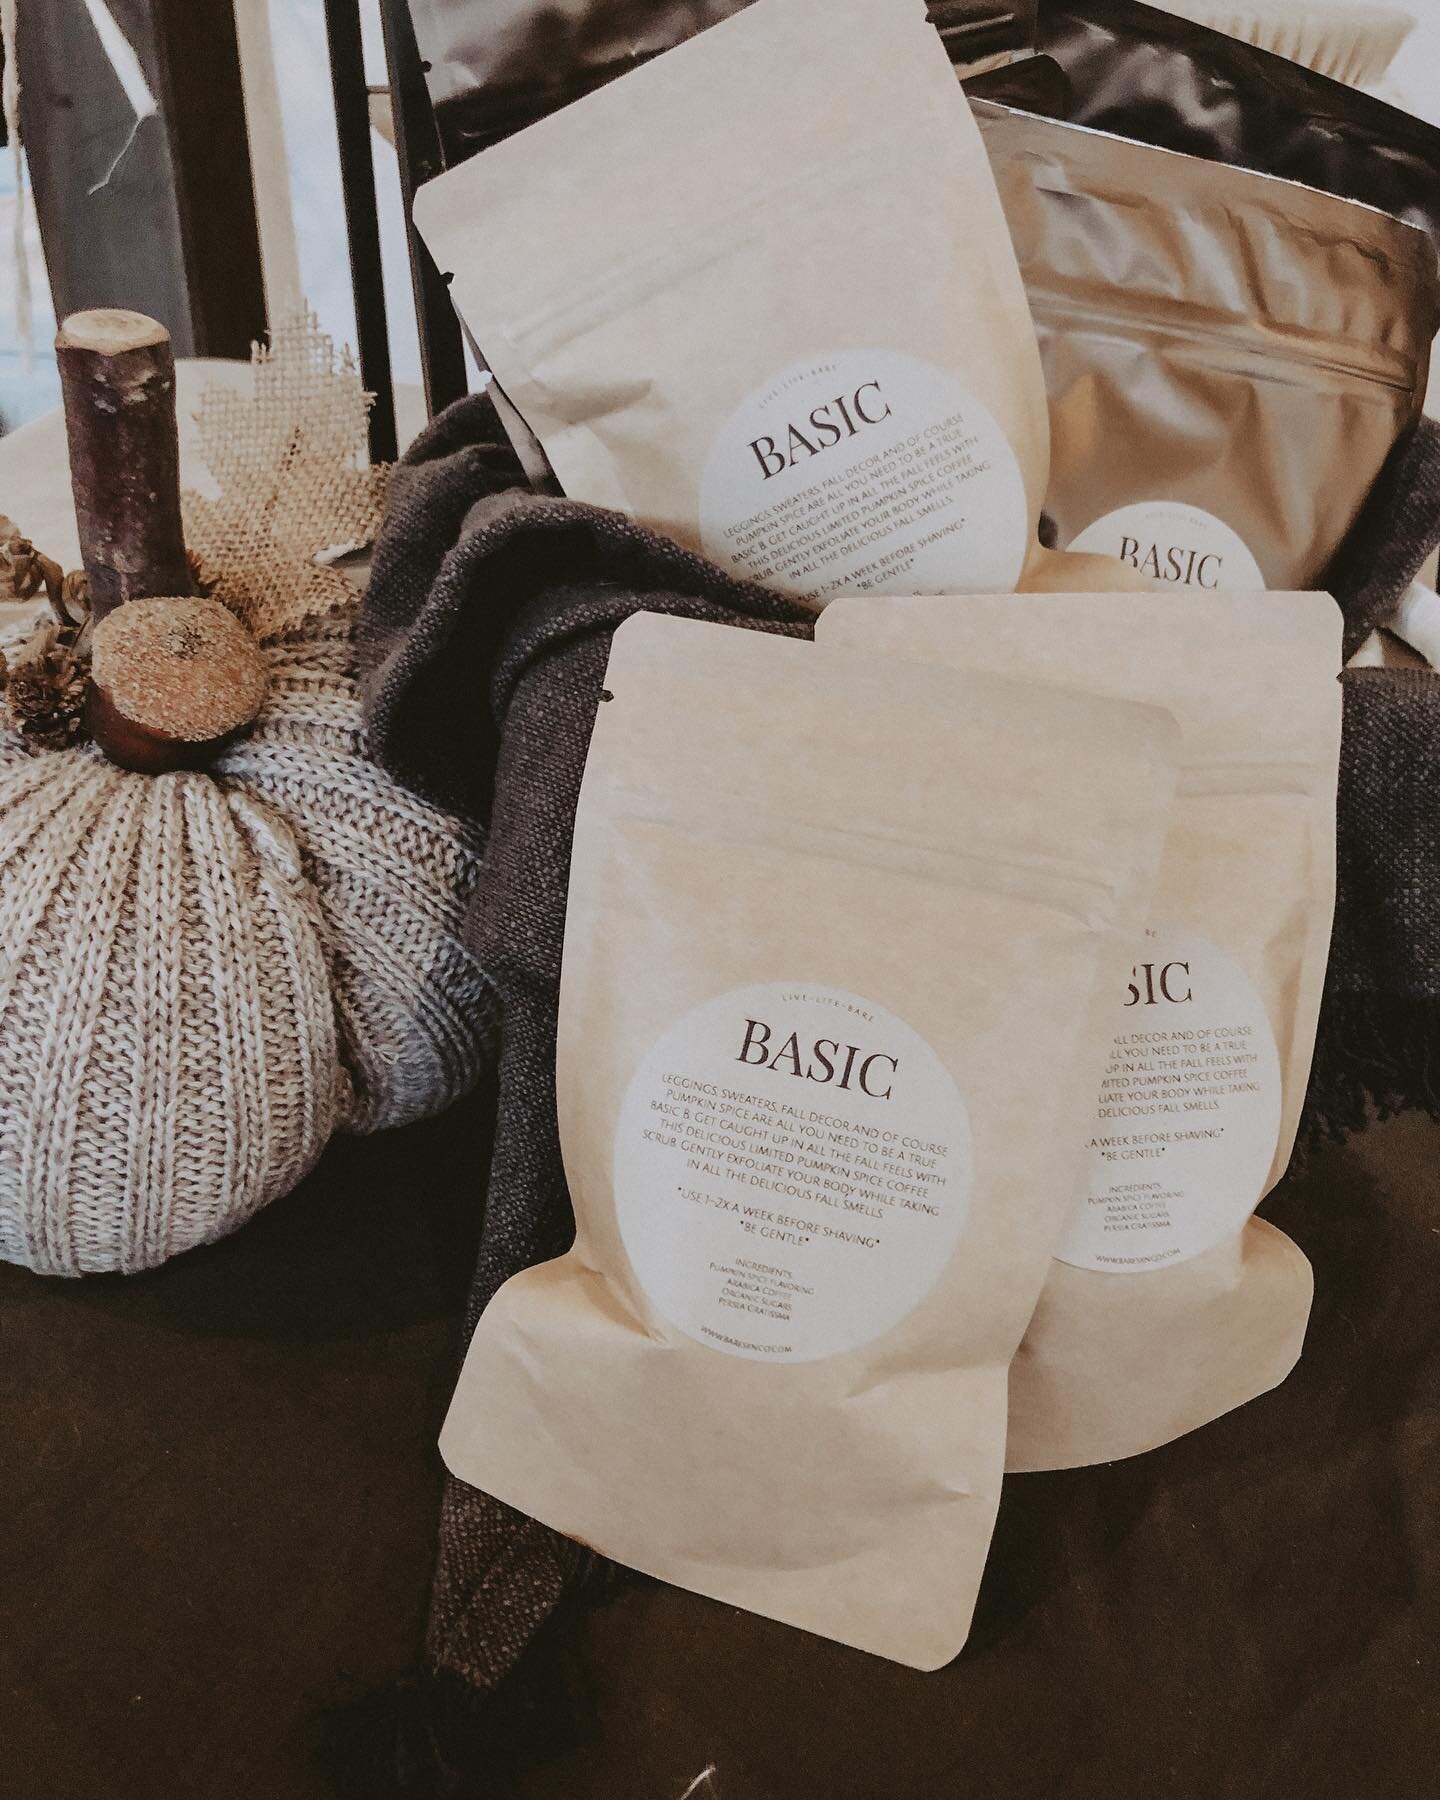 Anyone else absolutely LOVING these crisp fall nights? We leave our windows open, sleep soo good, and wake up to comfy crispy mornings!

With that, BASIC body scrub is back for a limited time!! The delicious aroma from our Pumpkin Spice Coffee Scrub 